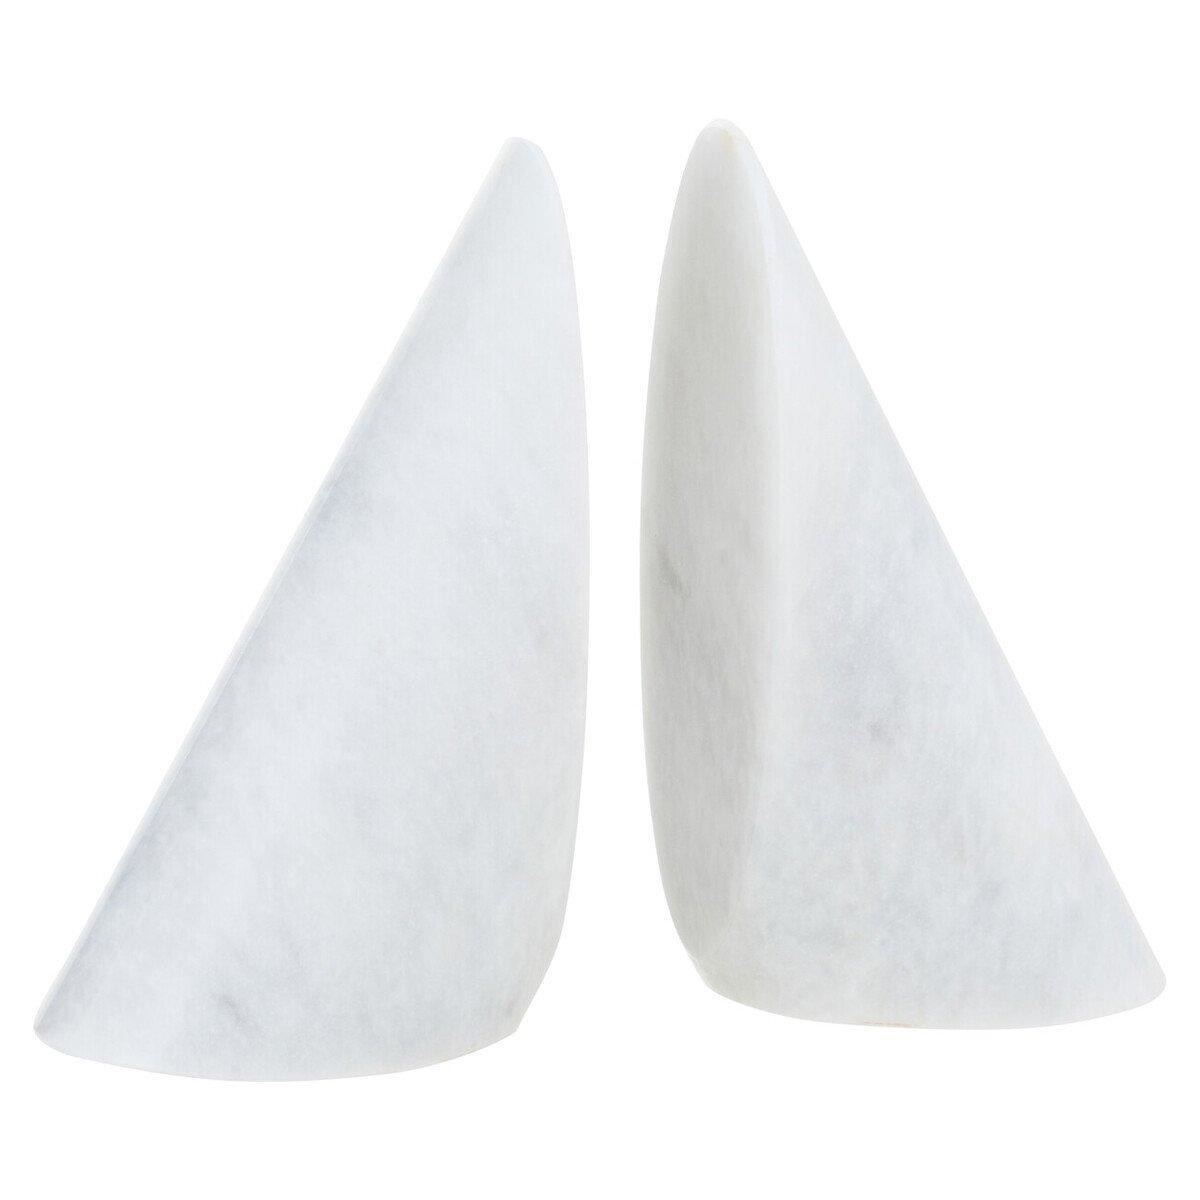 Salmo Set Of Two White Marble Bookends - image 1